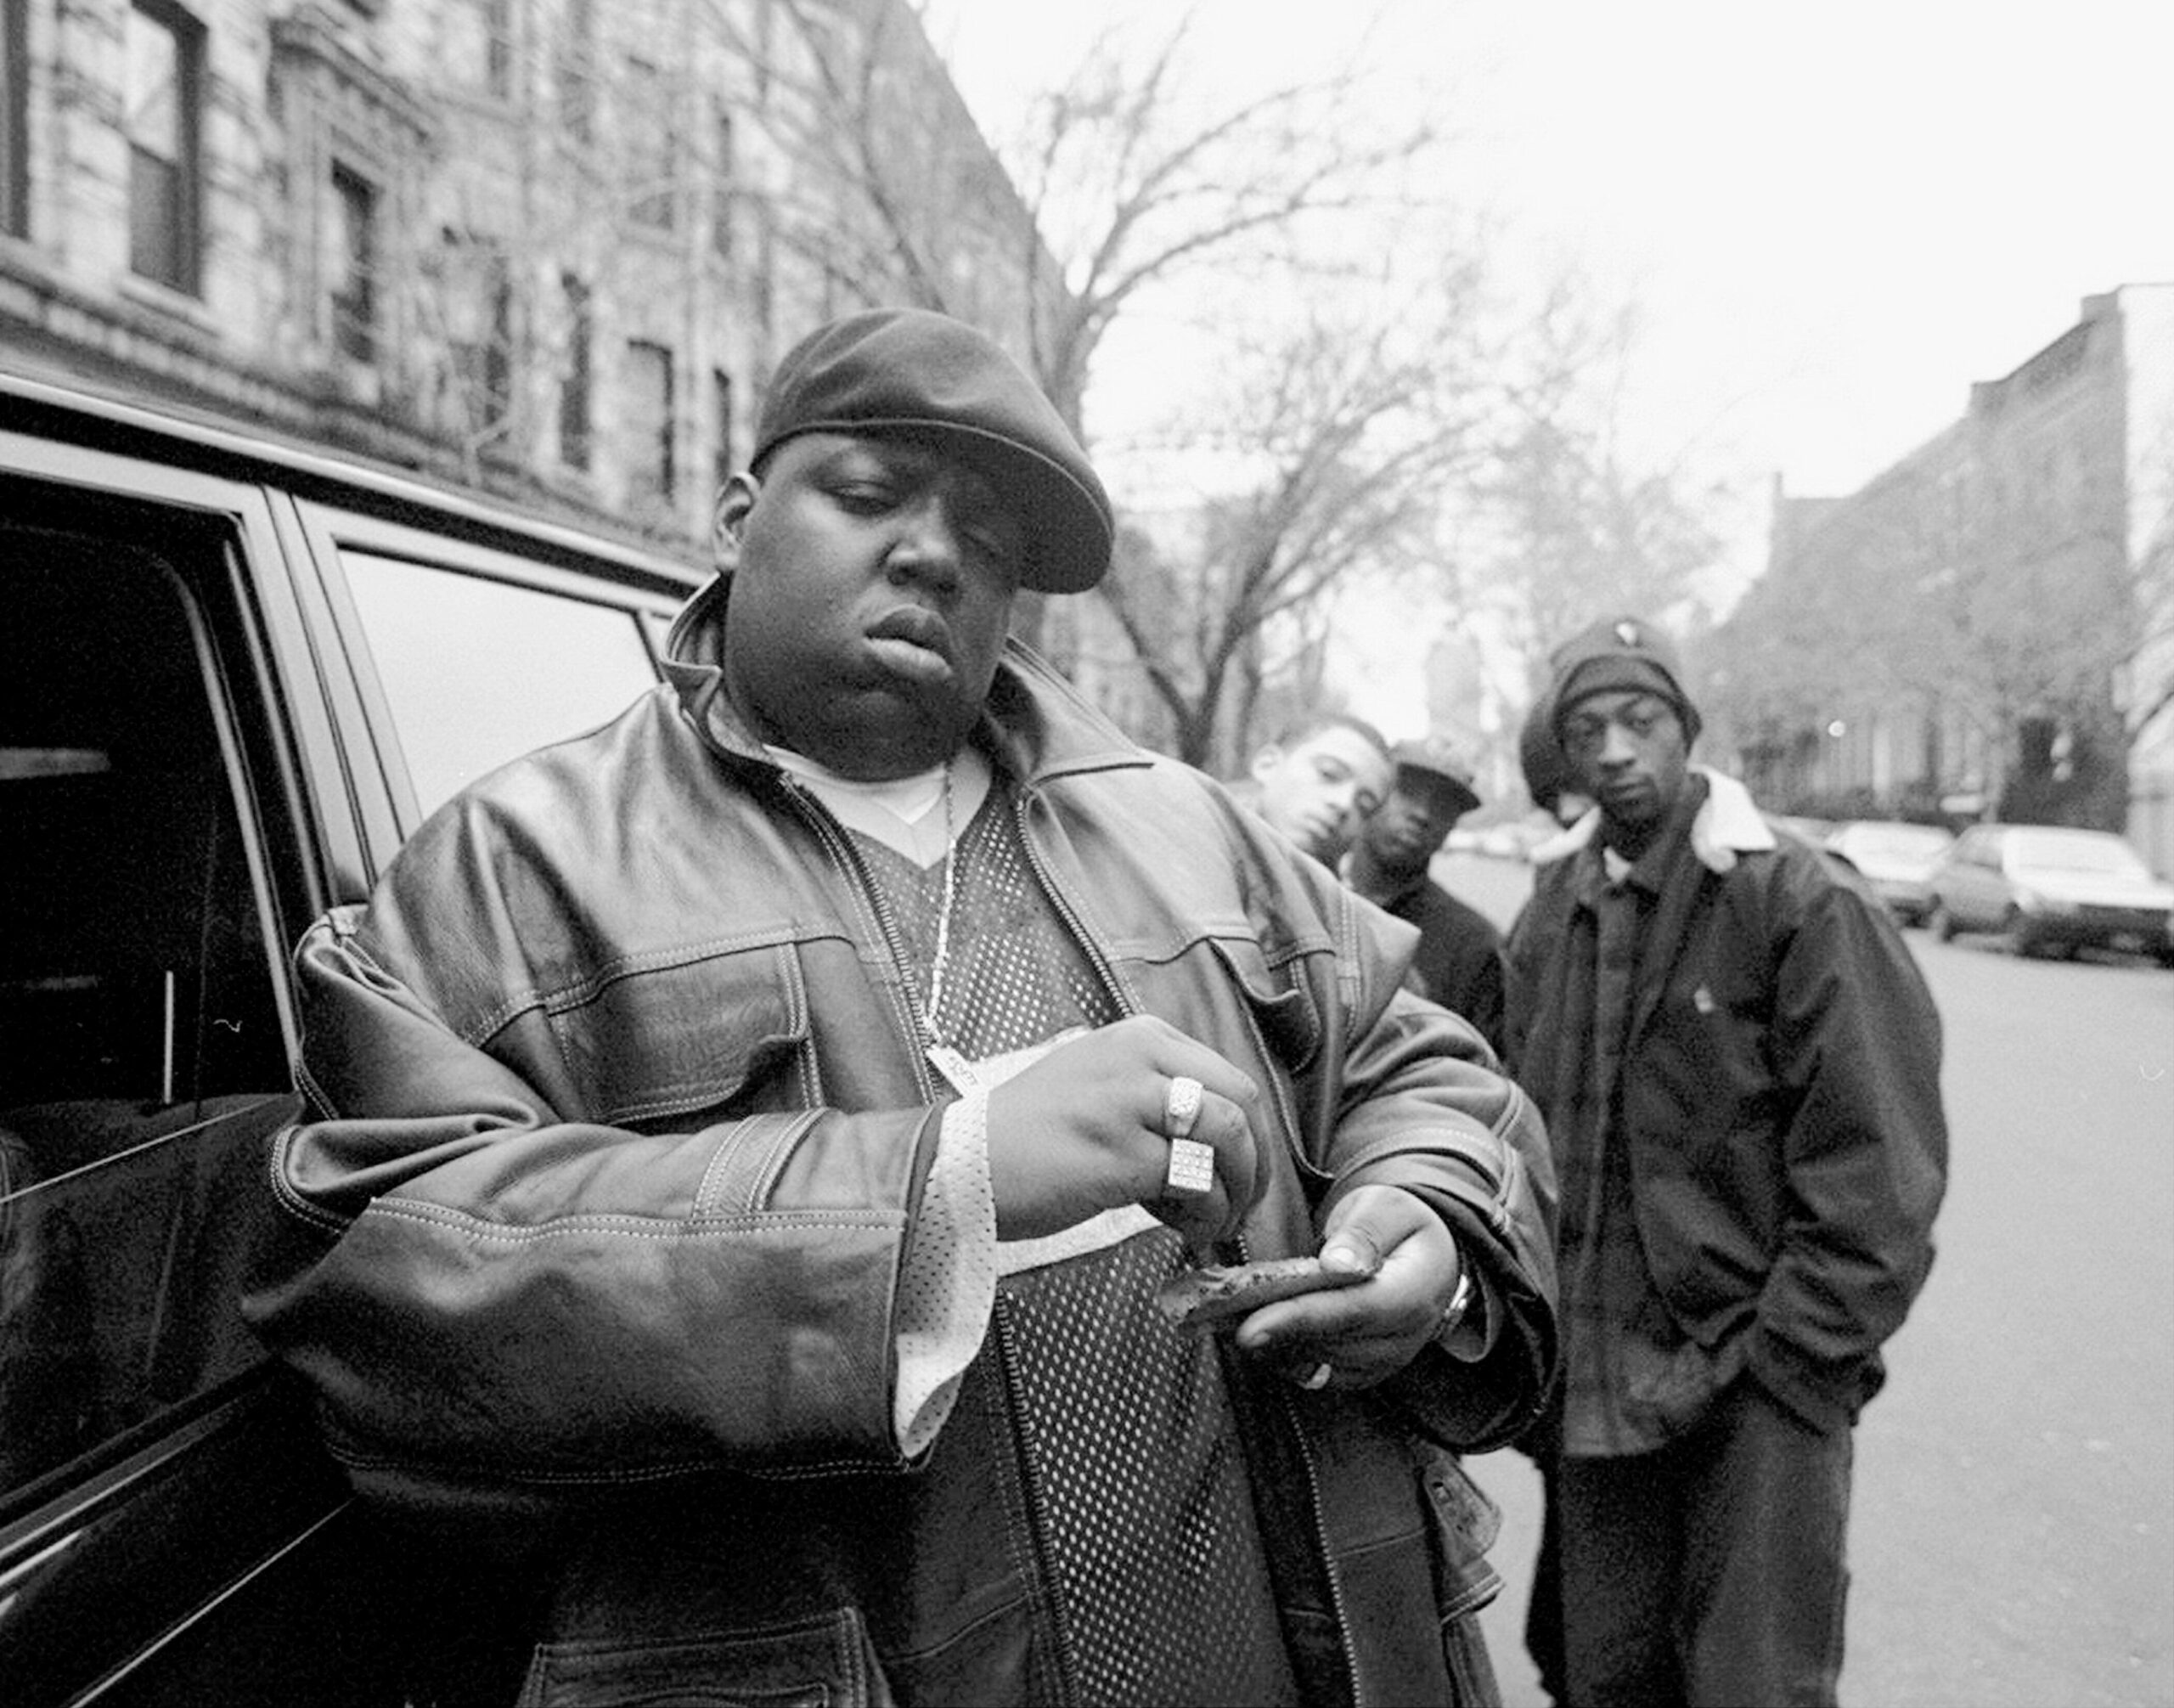 American rapper Notorious B.I.G., also known as Biggie Smalls, whose legal name was Chris Wallace (1972 - 1997), rolls a cigar-looking item outside his mother's house in Brooklyn, New York, Jan. 18, 1995. 